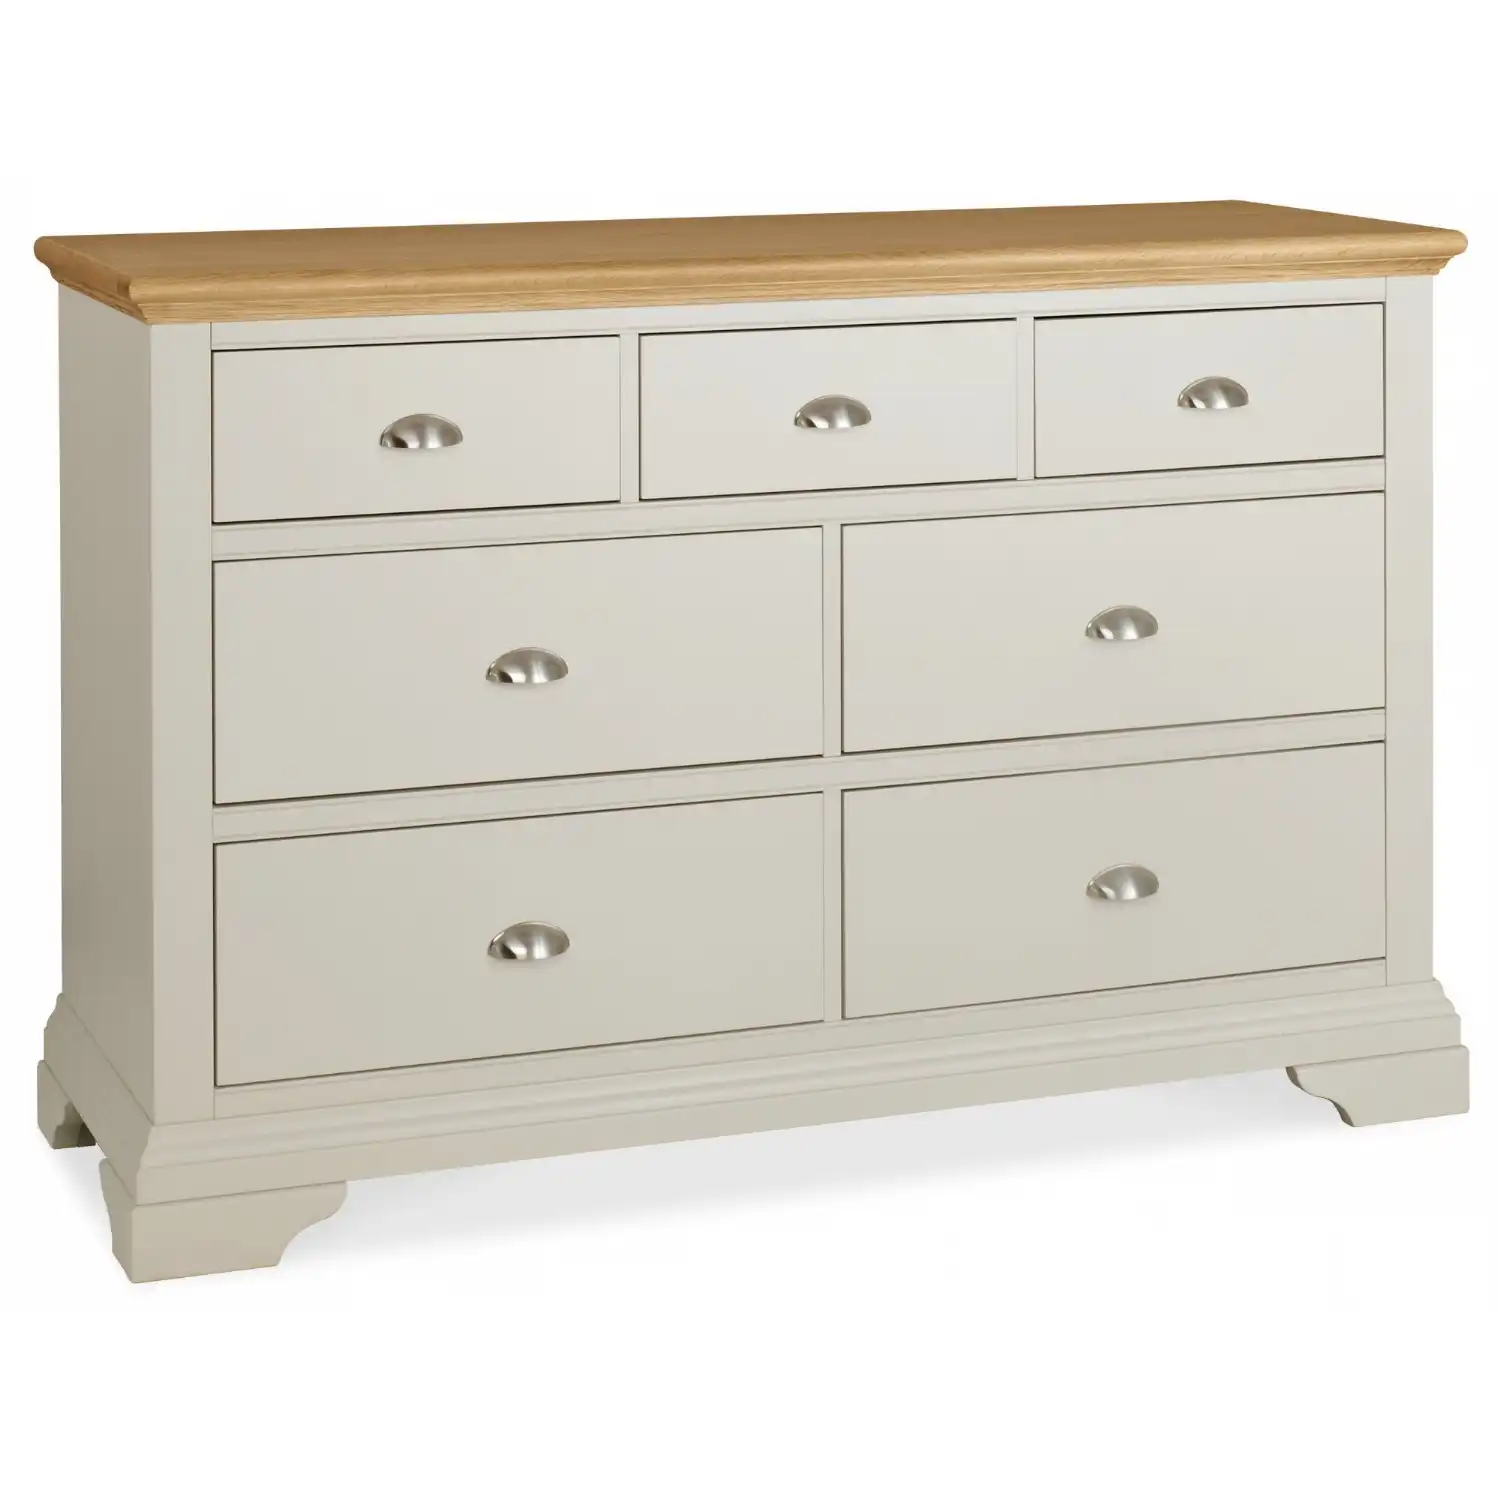 Large Grey Painted Oak Top Chest of 7 Drawers